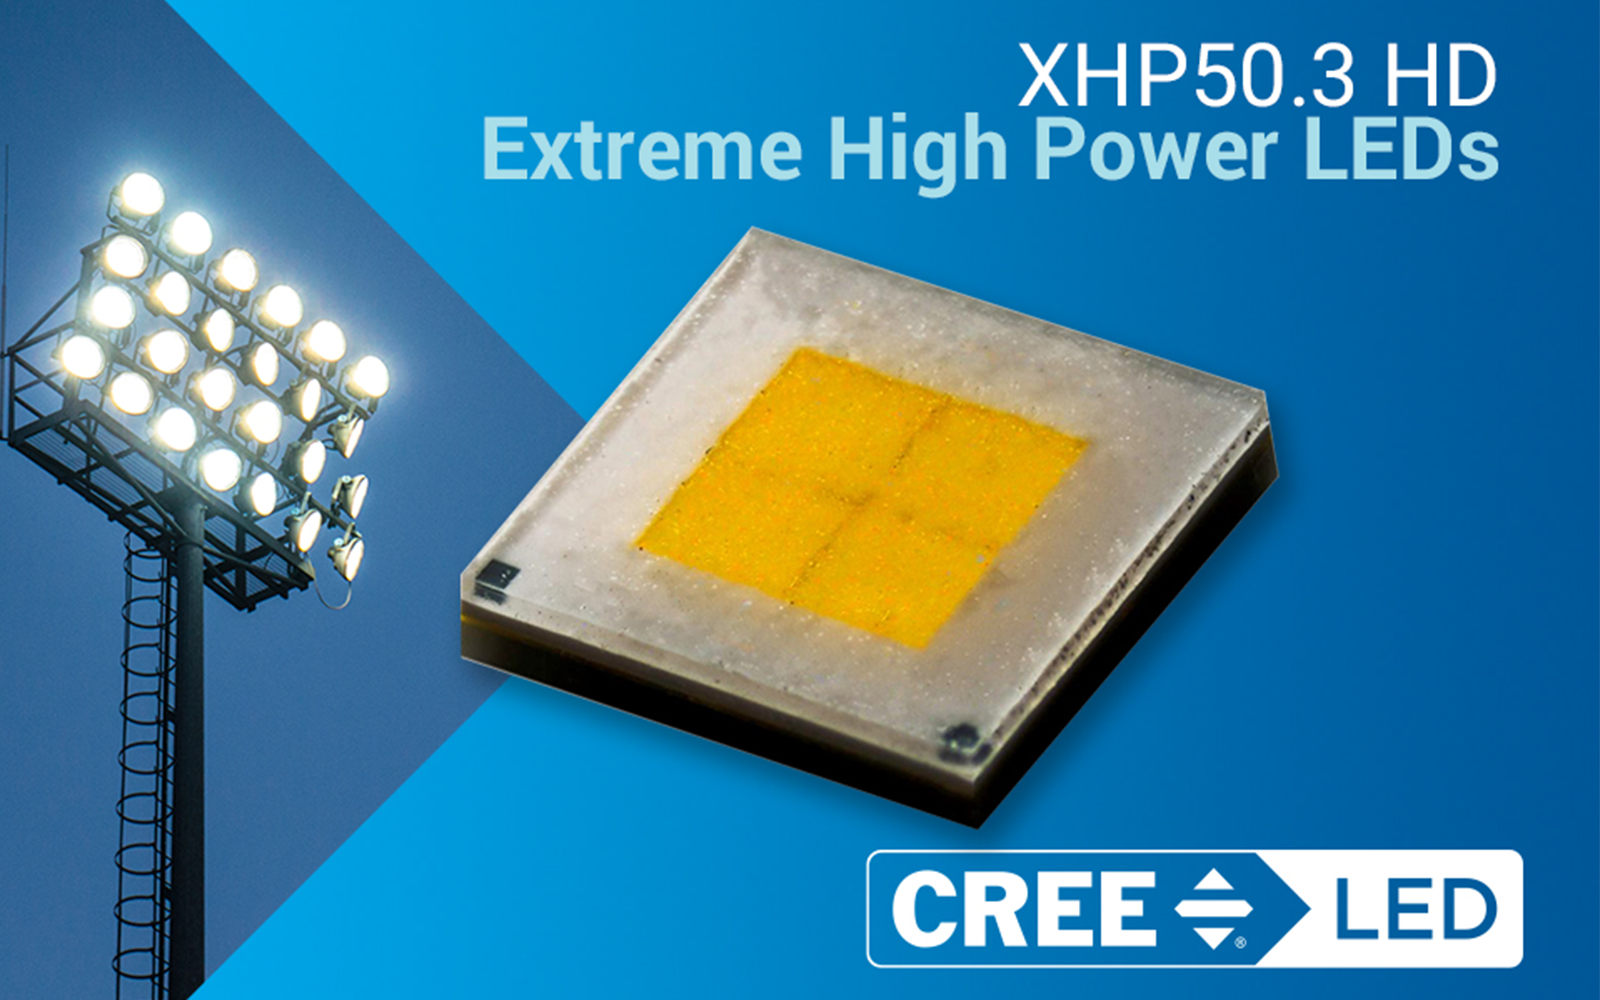 New Extreme High Power Leds Deliver Best Optical Performance — Led